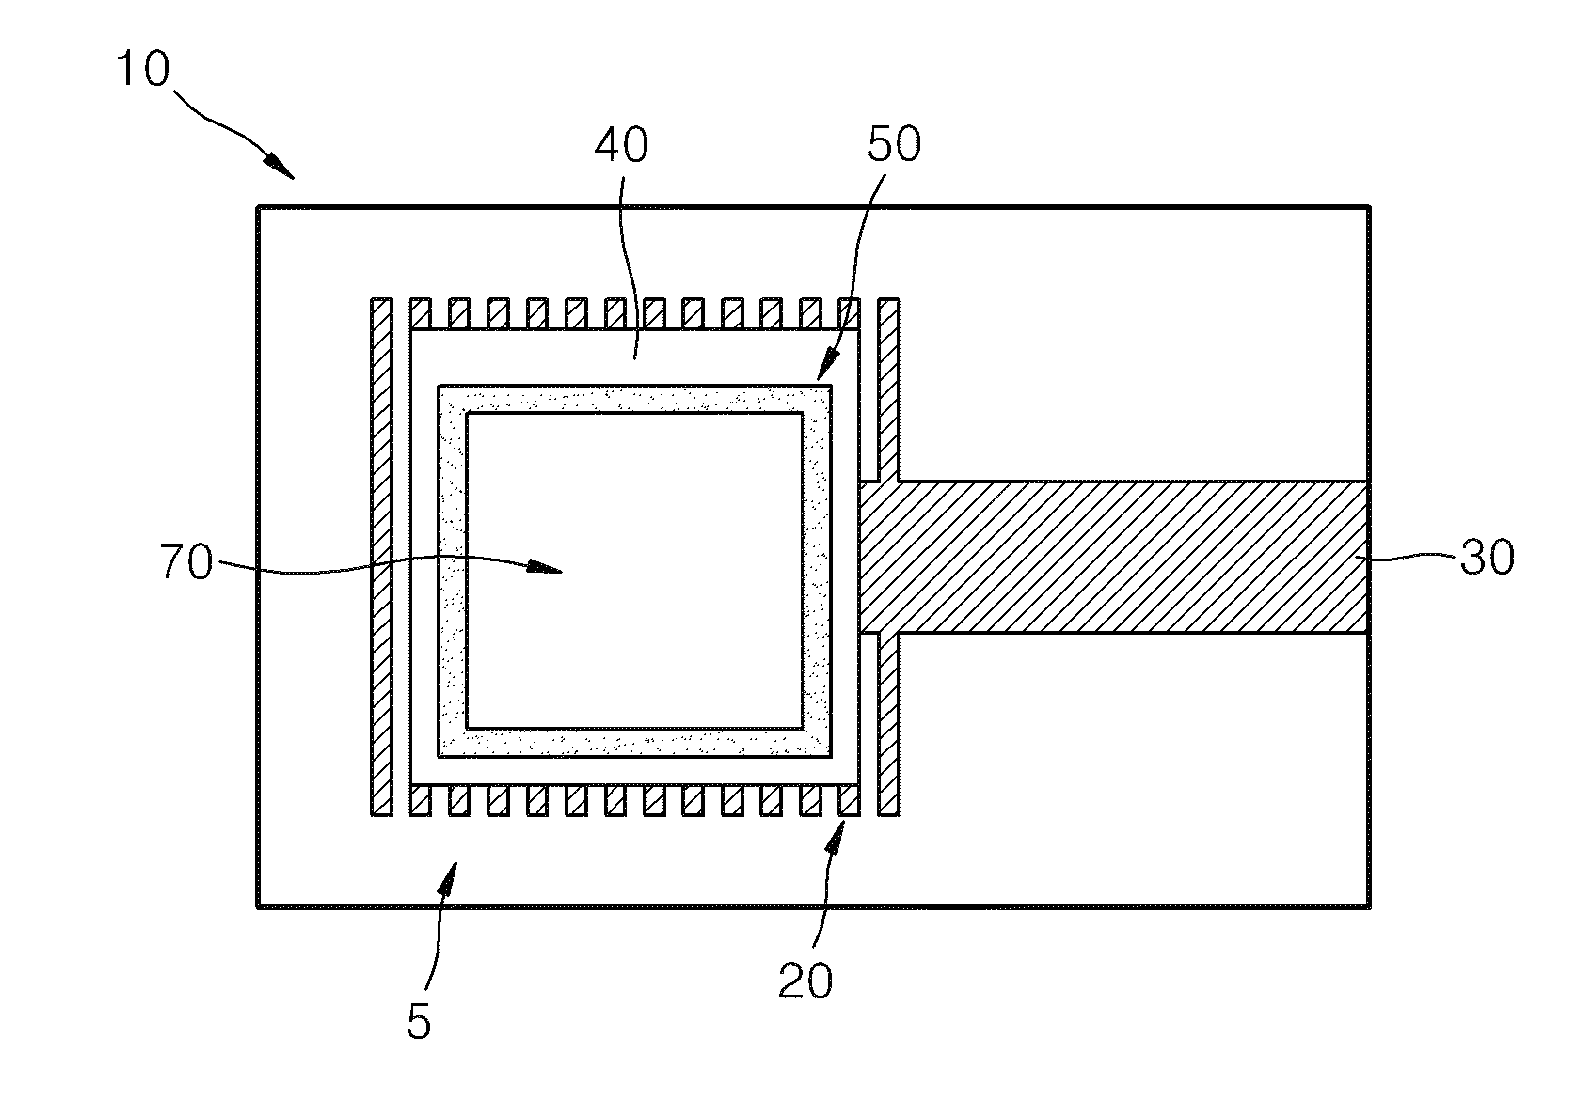 Hybrid laser light sources for photonic integrated circuits